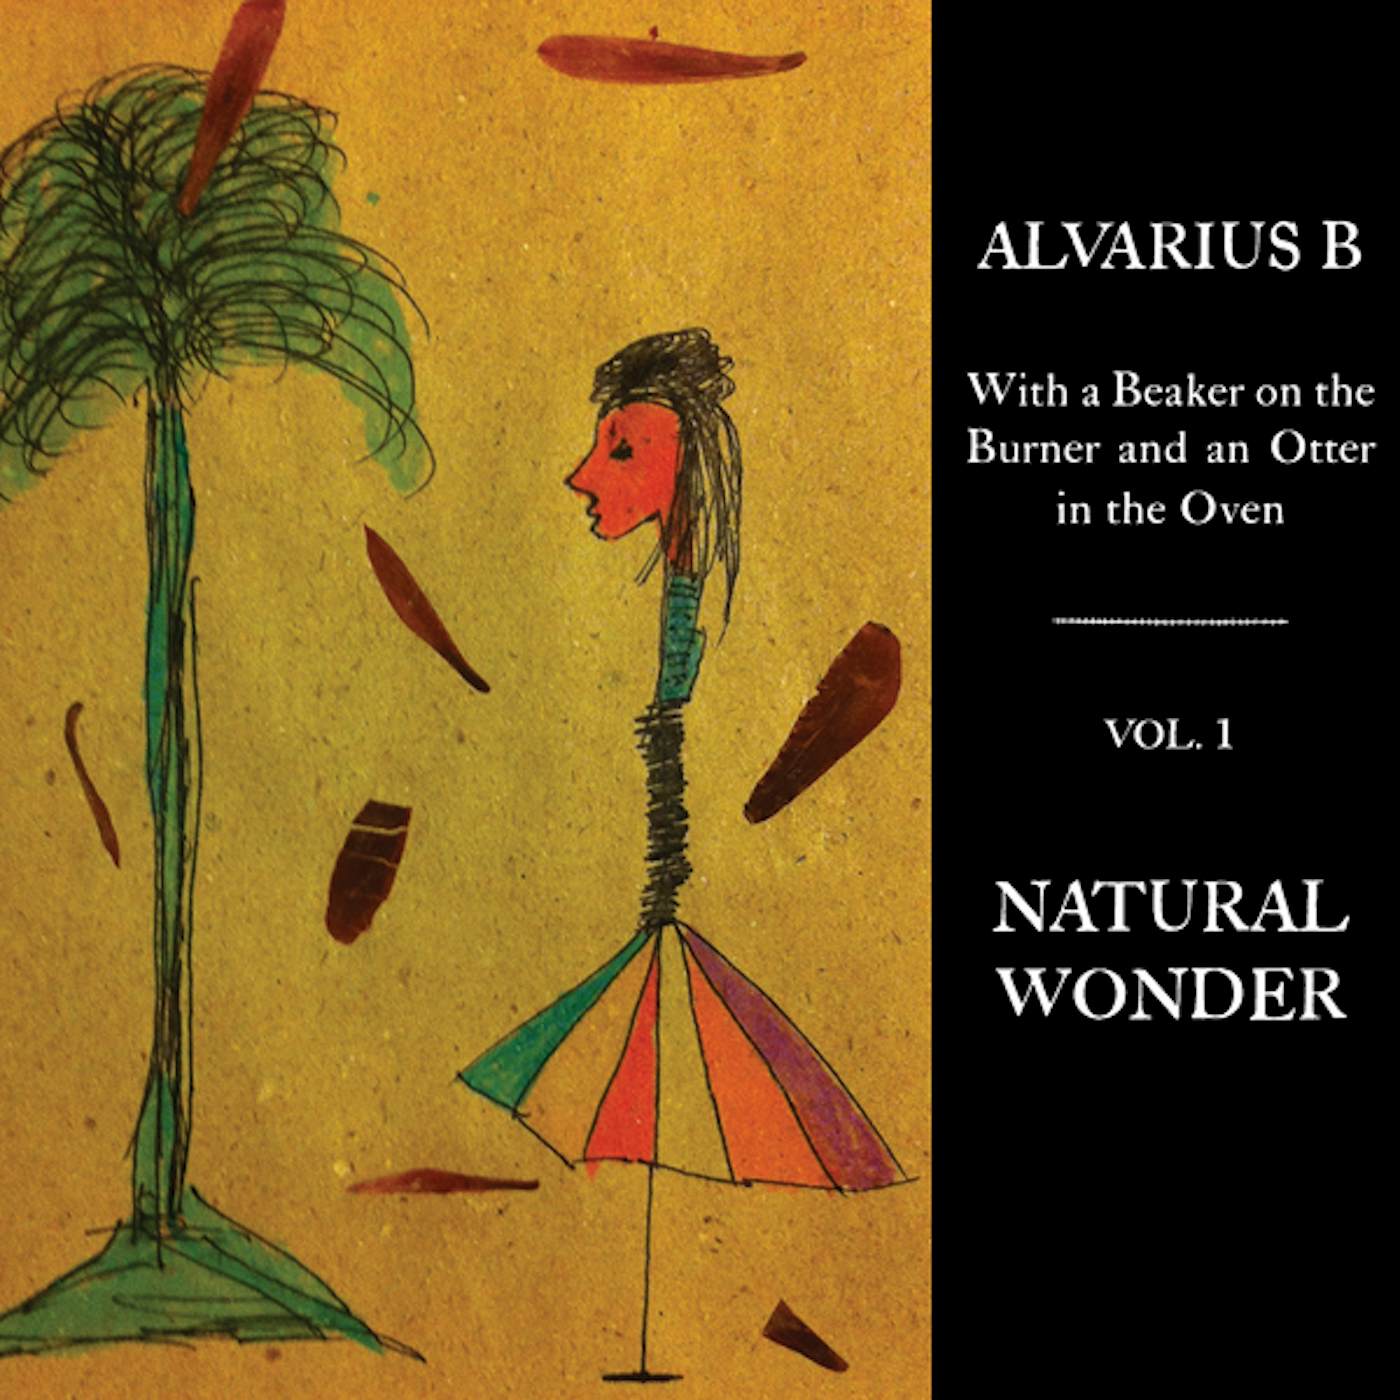 Alvarius B. WITH A BEAKER ON THE BURNER AND AN OTTER IN THE OVEN - VOL. 1 NATURAL WONDER Vinyl Record